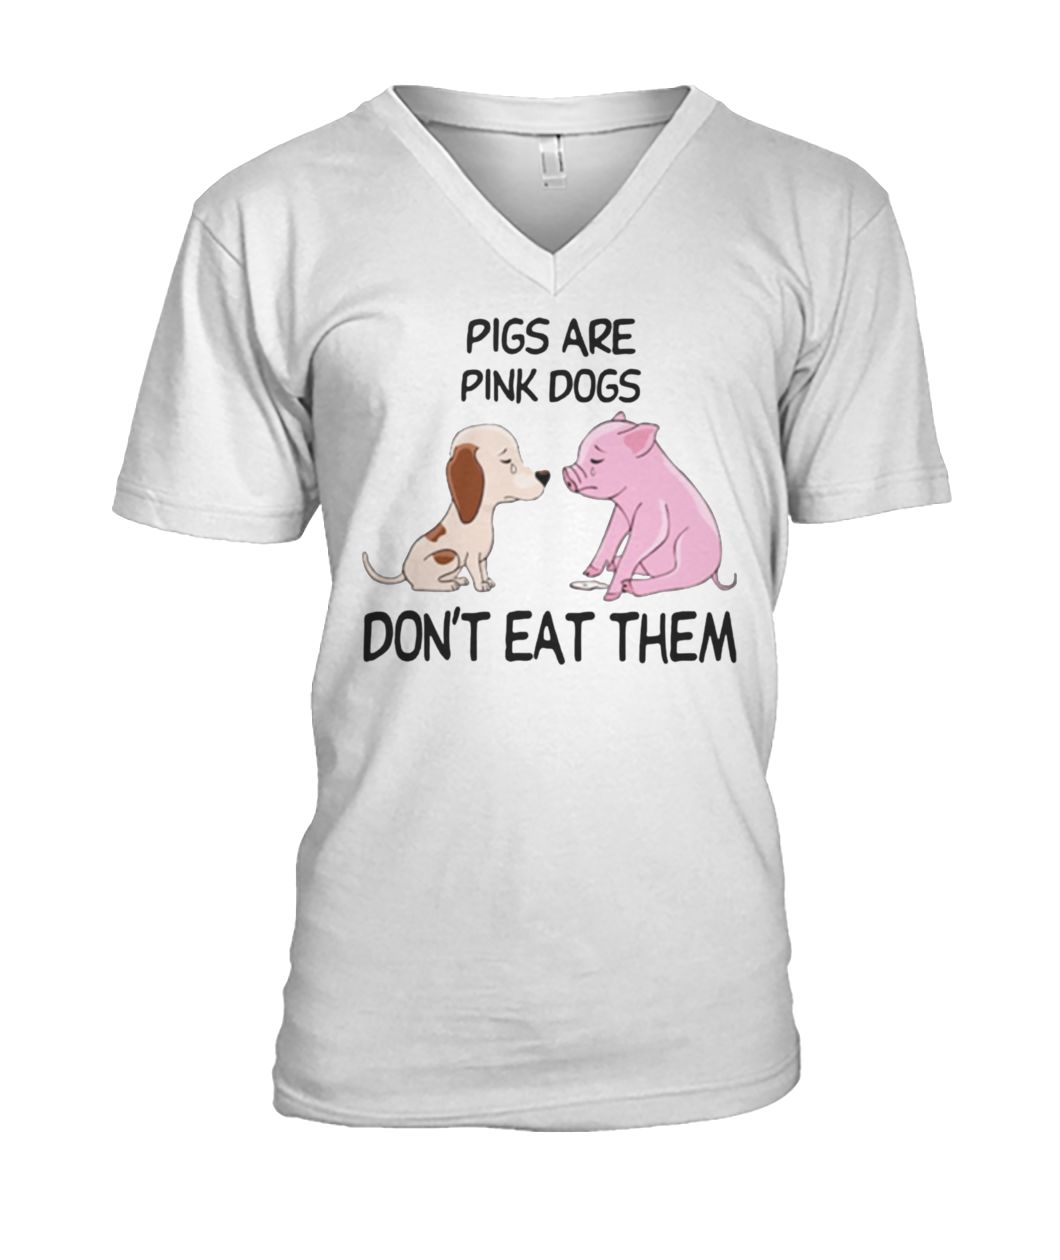 Pigs are pink dogs dont eat them mens v-neck